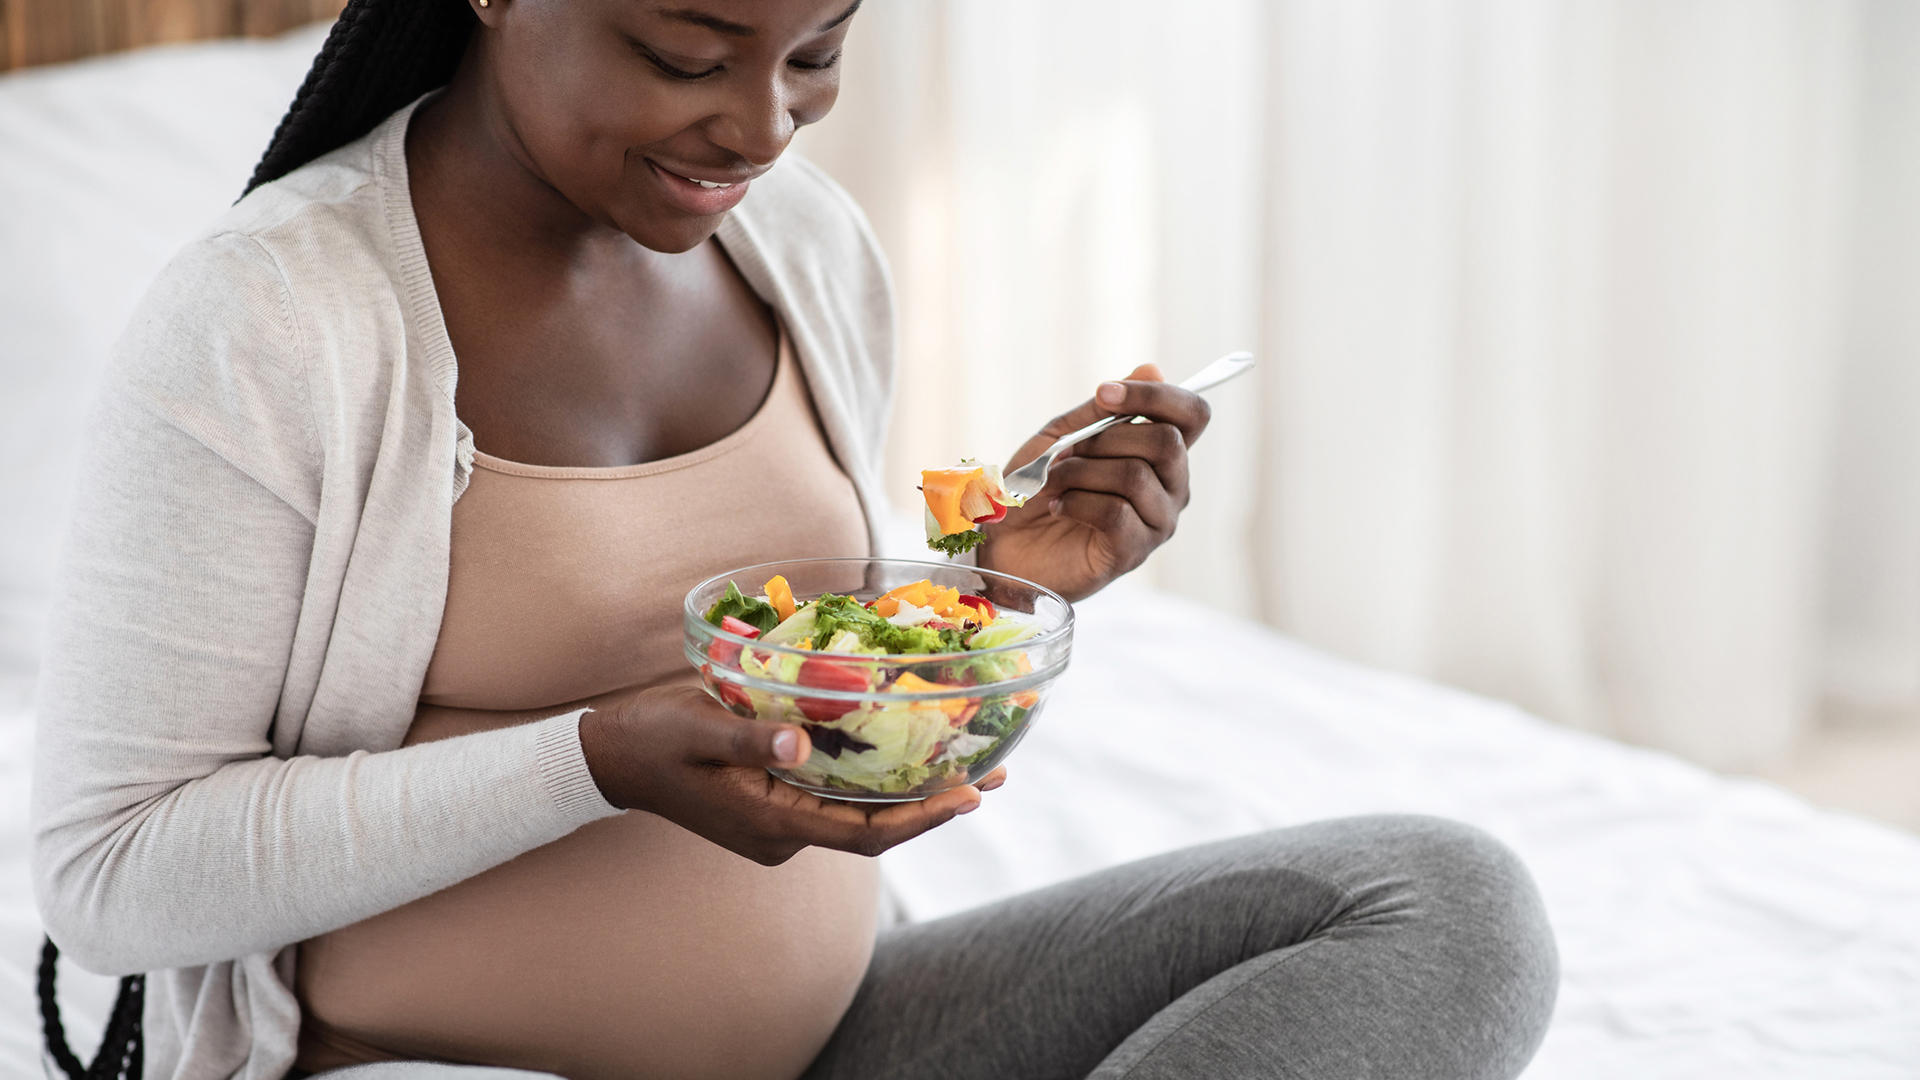 How do you manage your pregnancy diet and symptoms when you have coeliac disease or are gluten free?